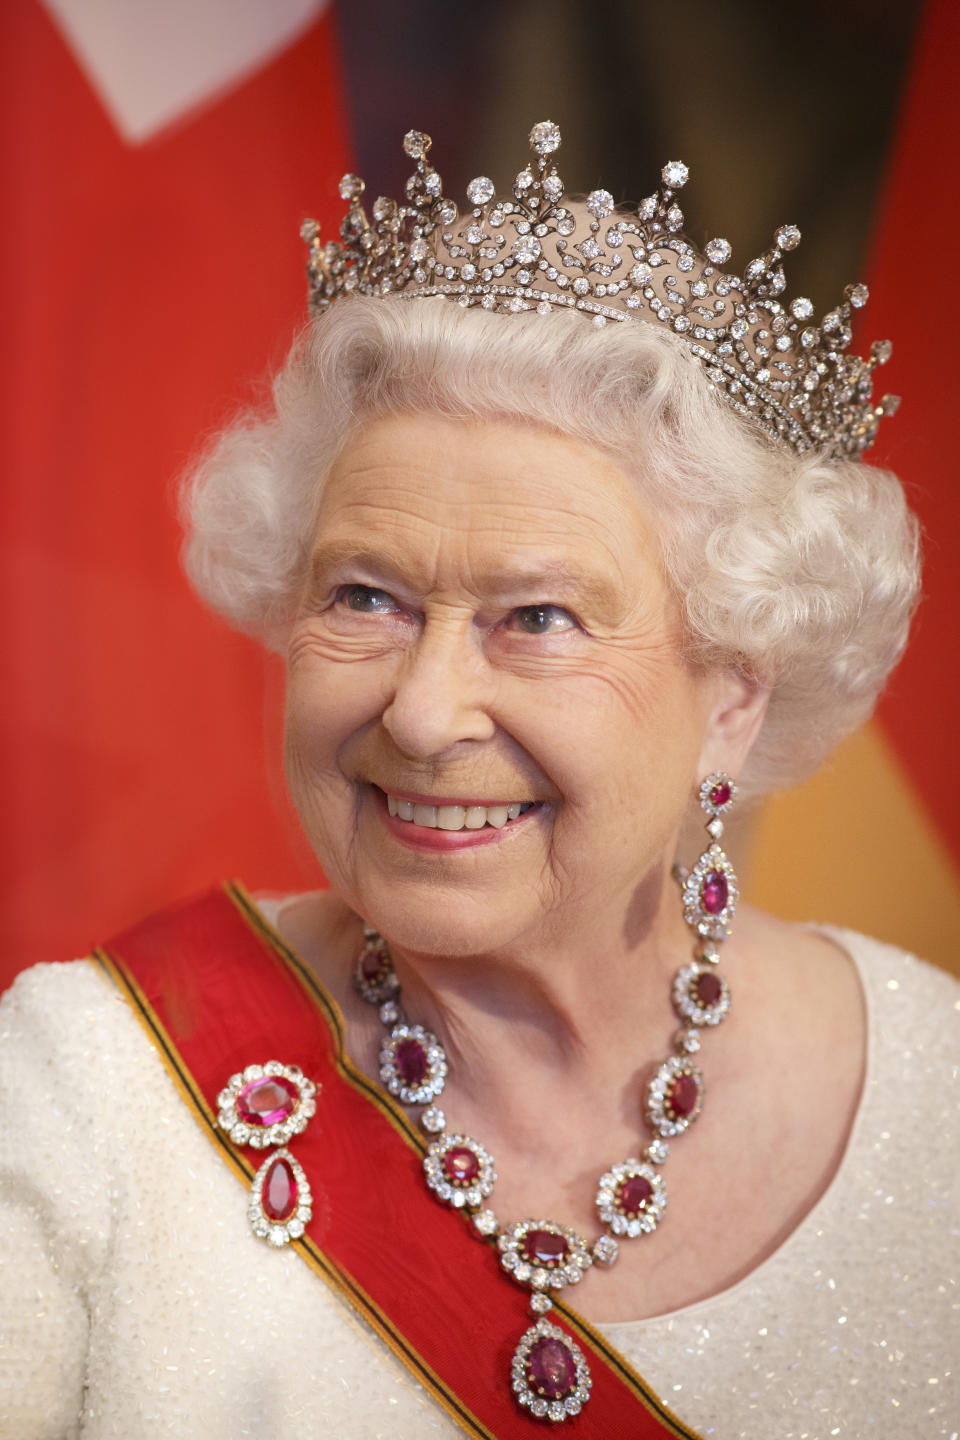 Will the Queen officially abdicate? Source: Getty